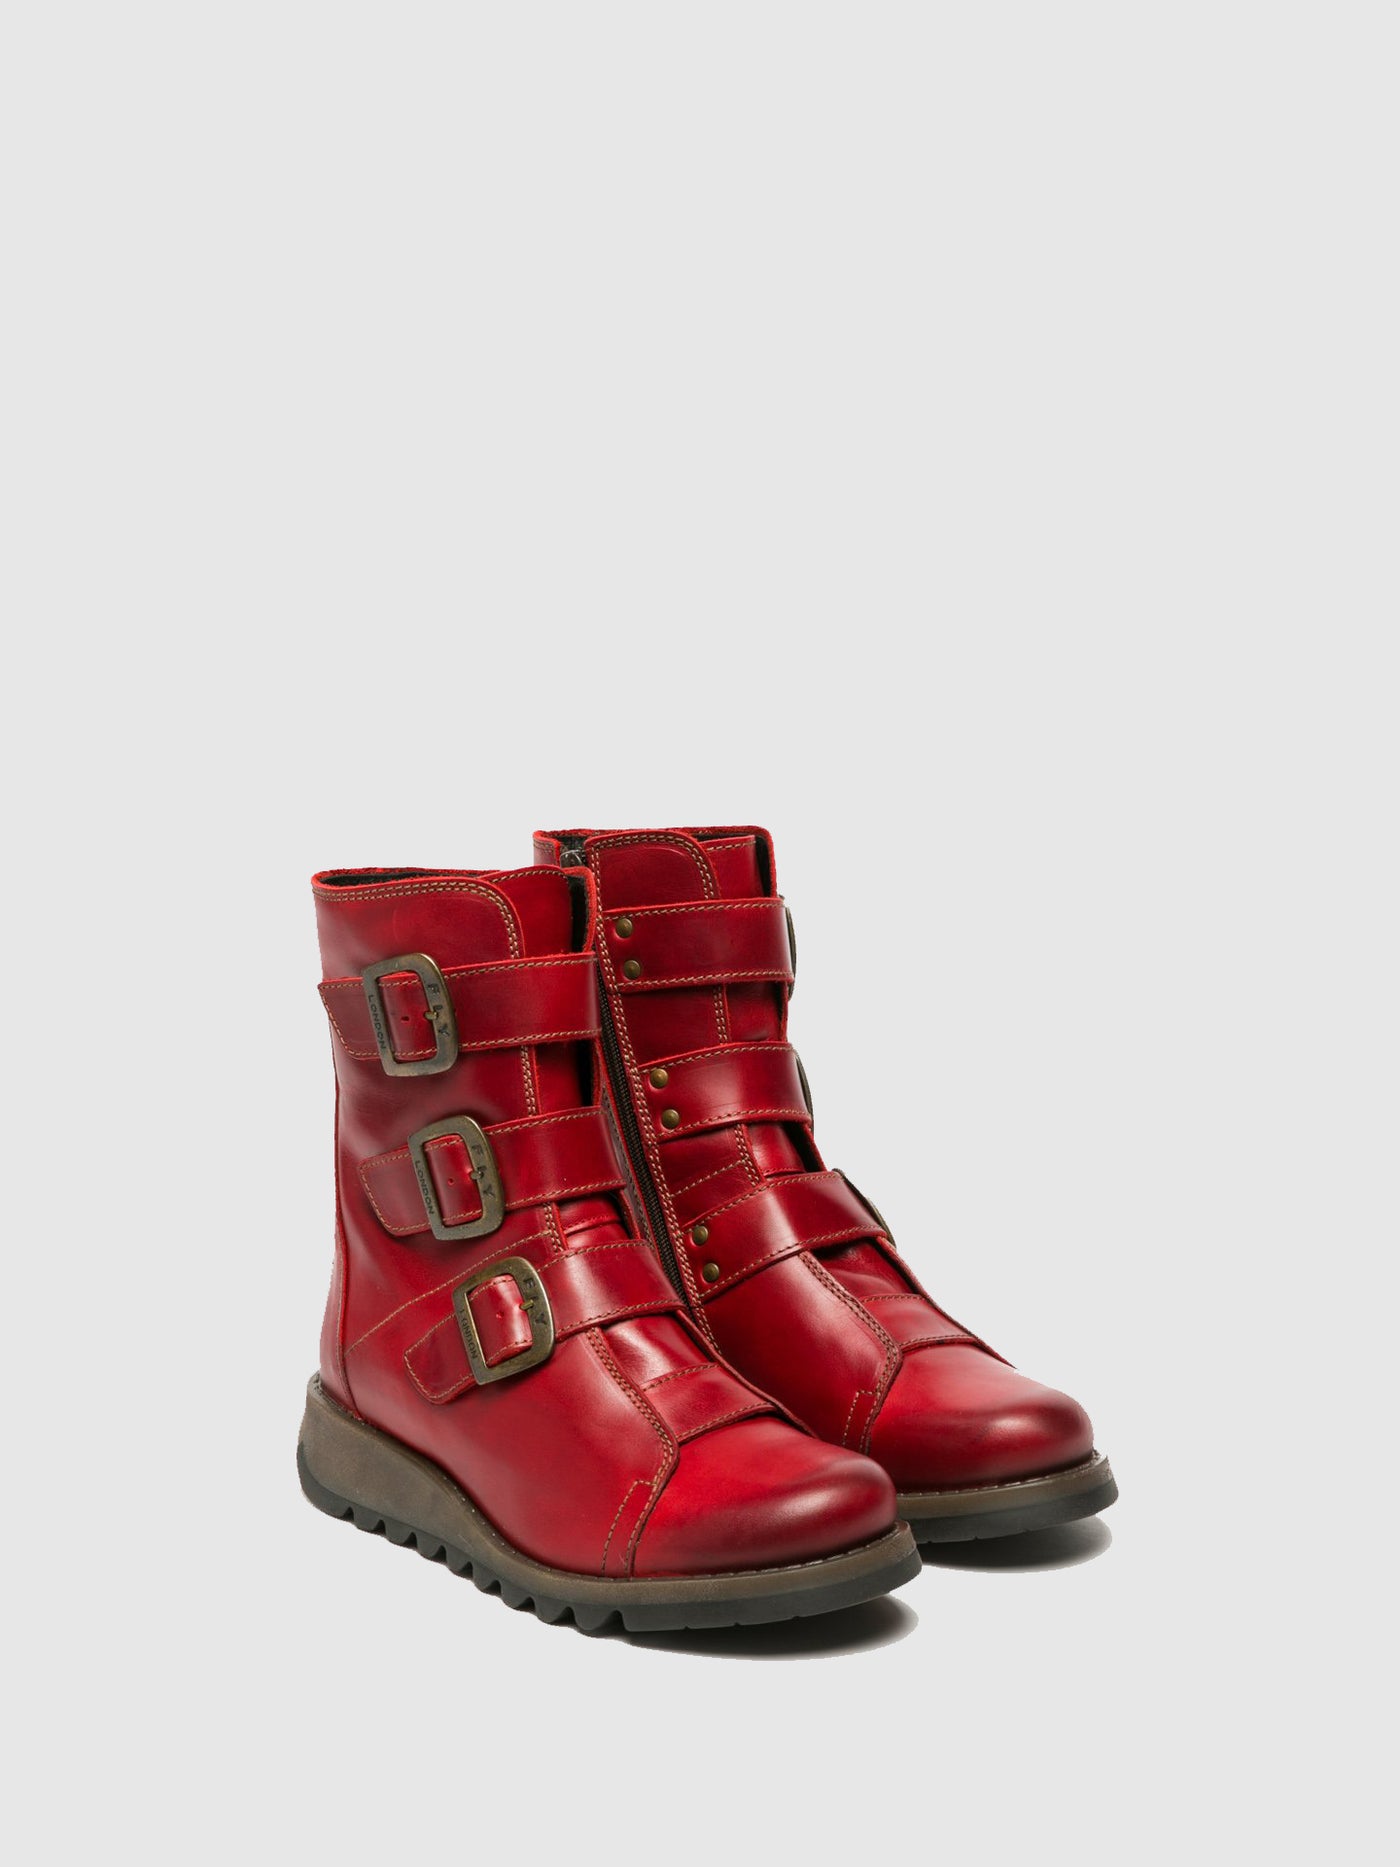 Buckle Ankle Boots SCOP110FLY RED